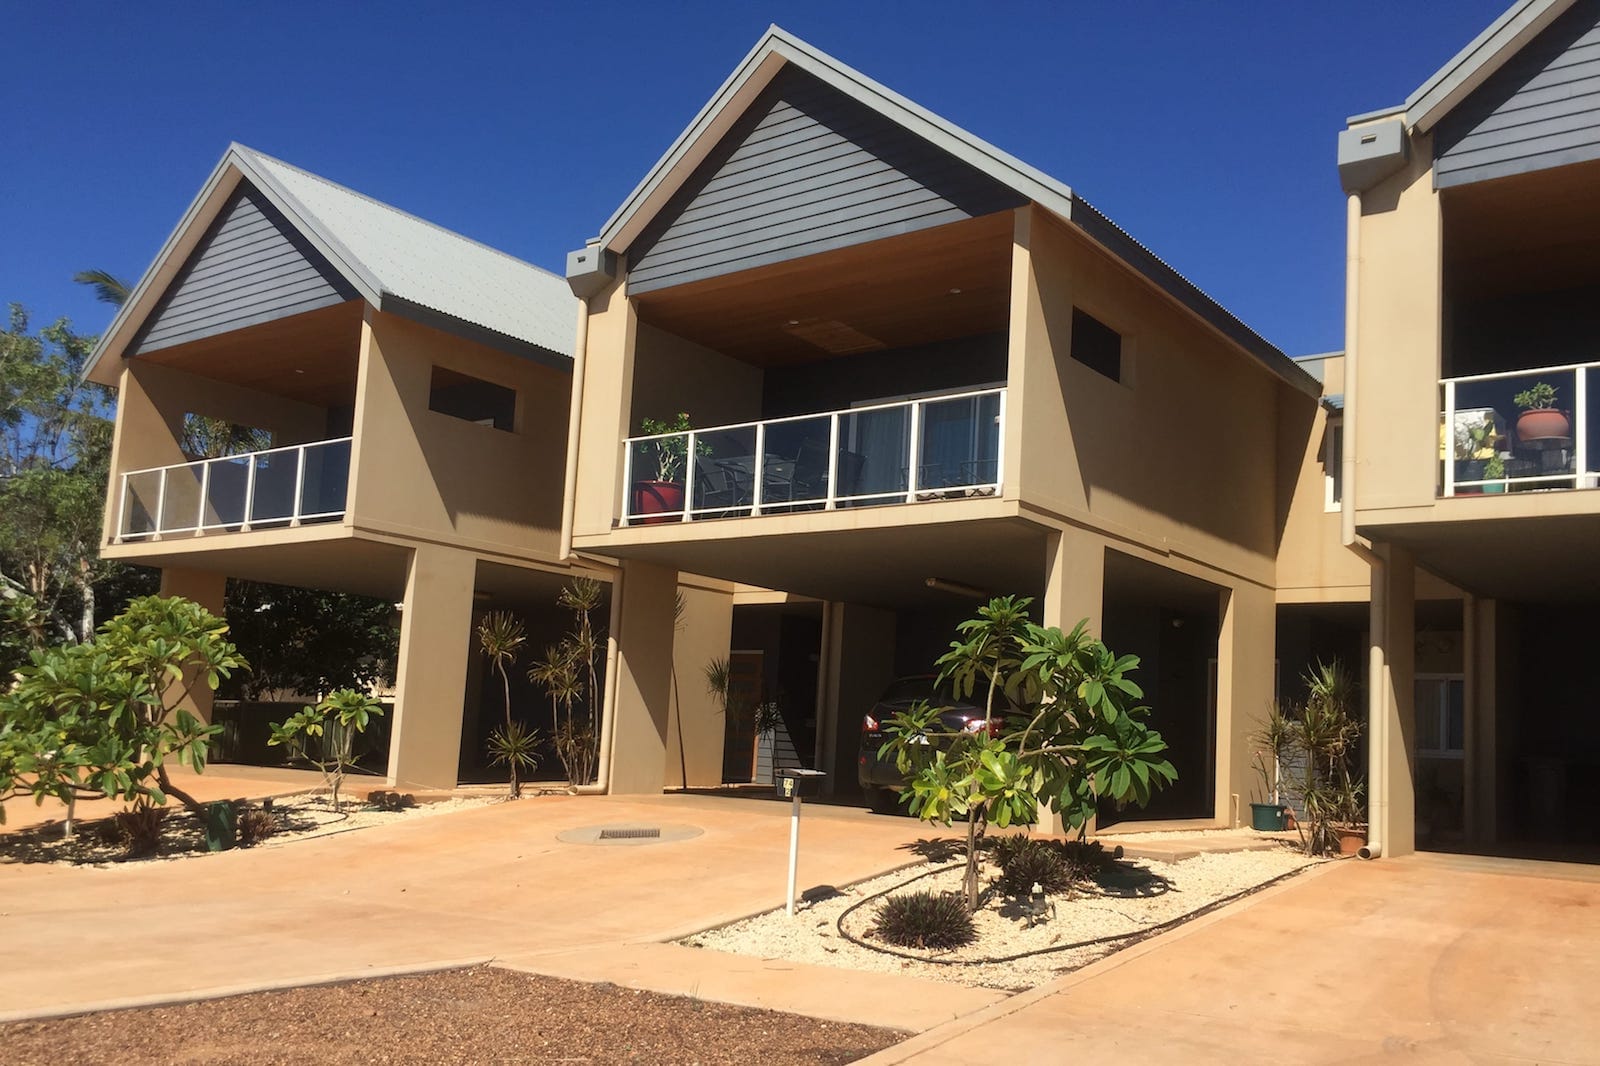 Port hedland jobs with housing